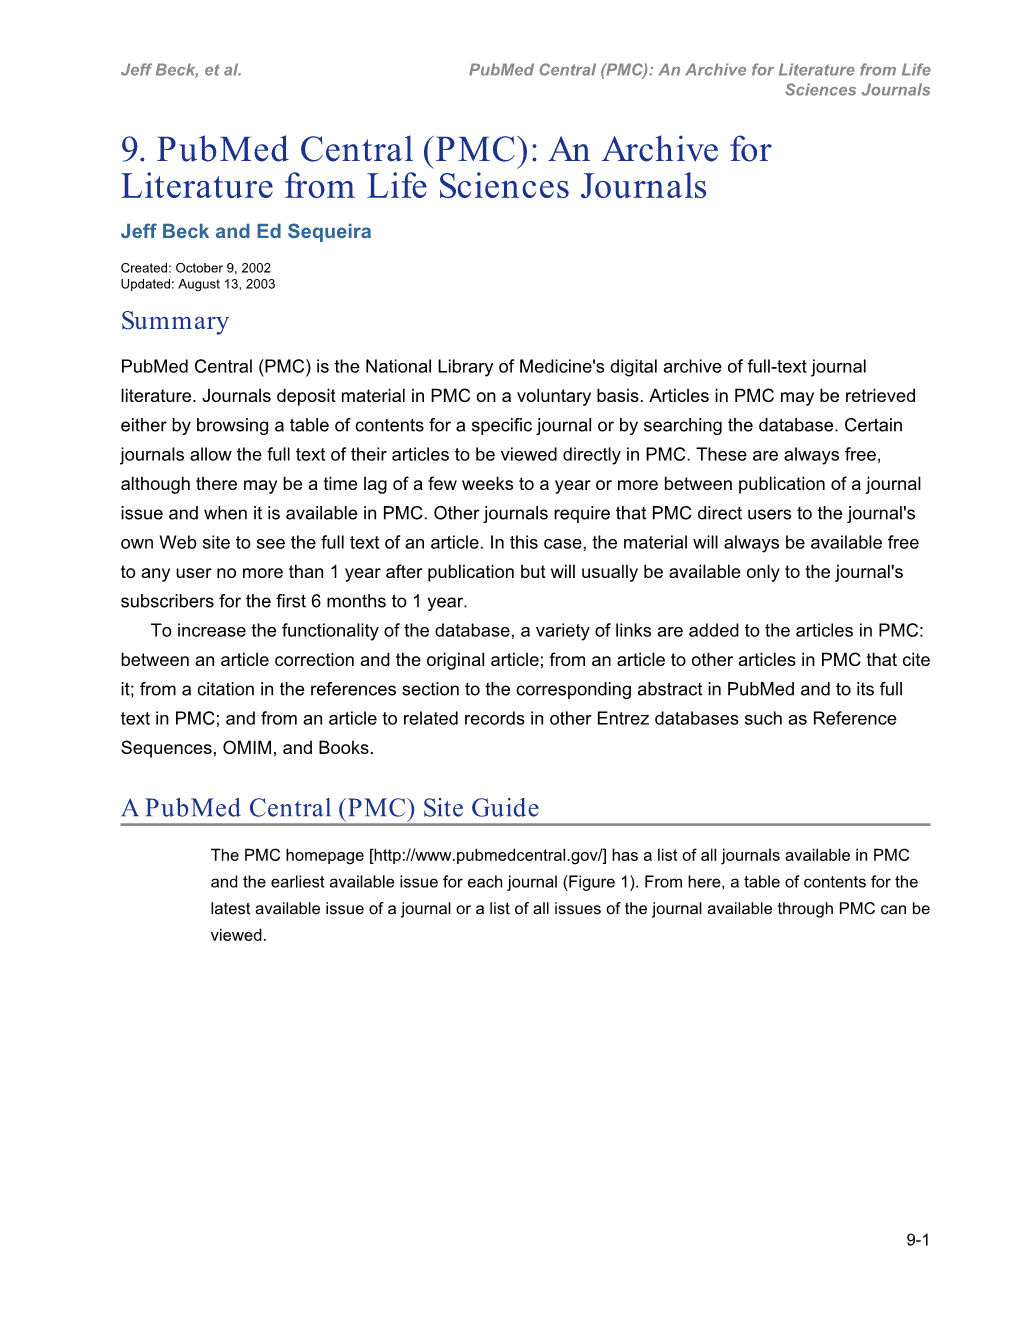 9. Pubmed Central (PMC): an Archive for Literature from Life Sciences Journals Jeff Beck and Ed Sequeira